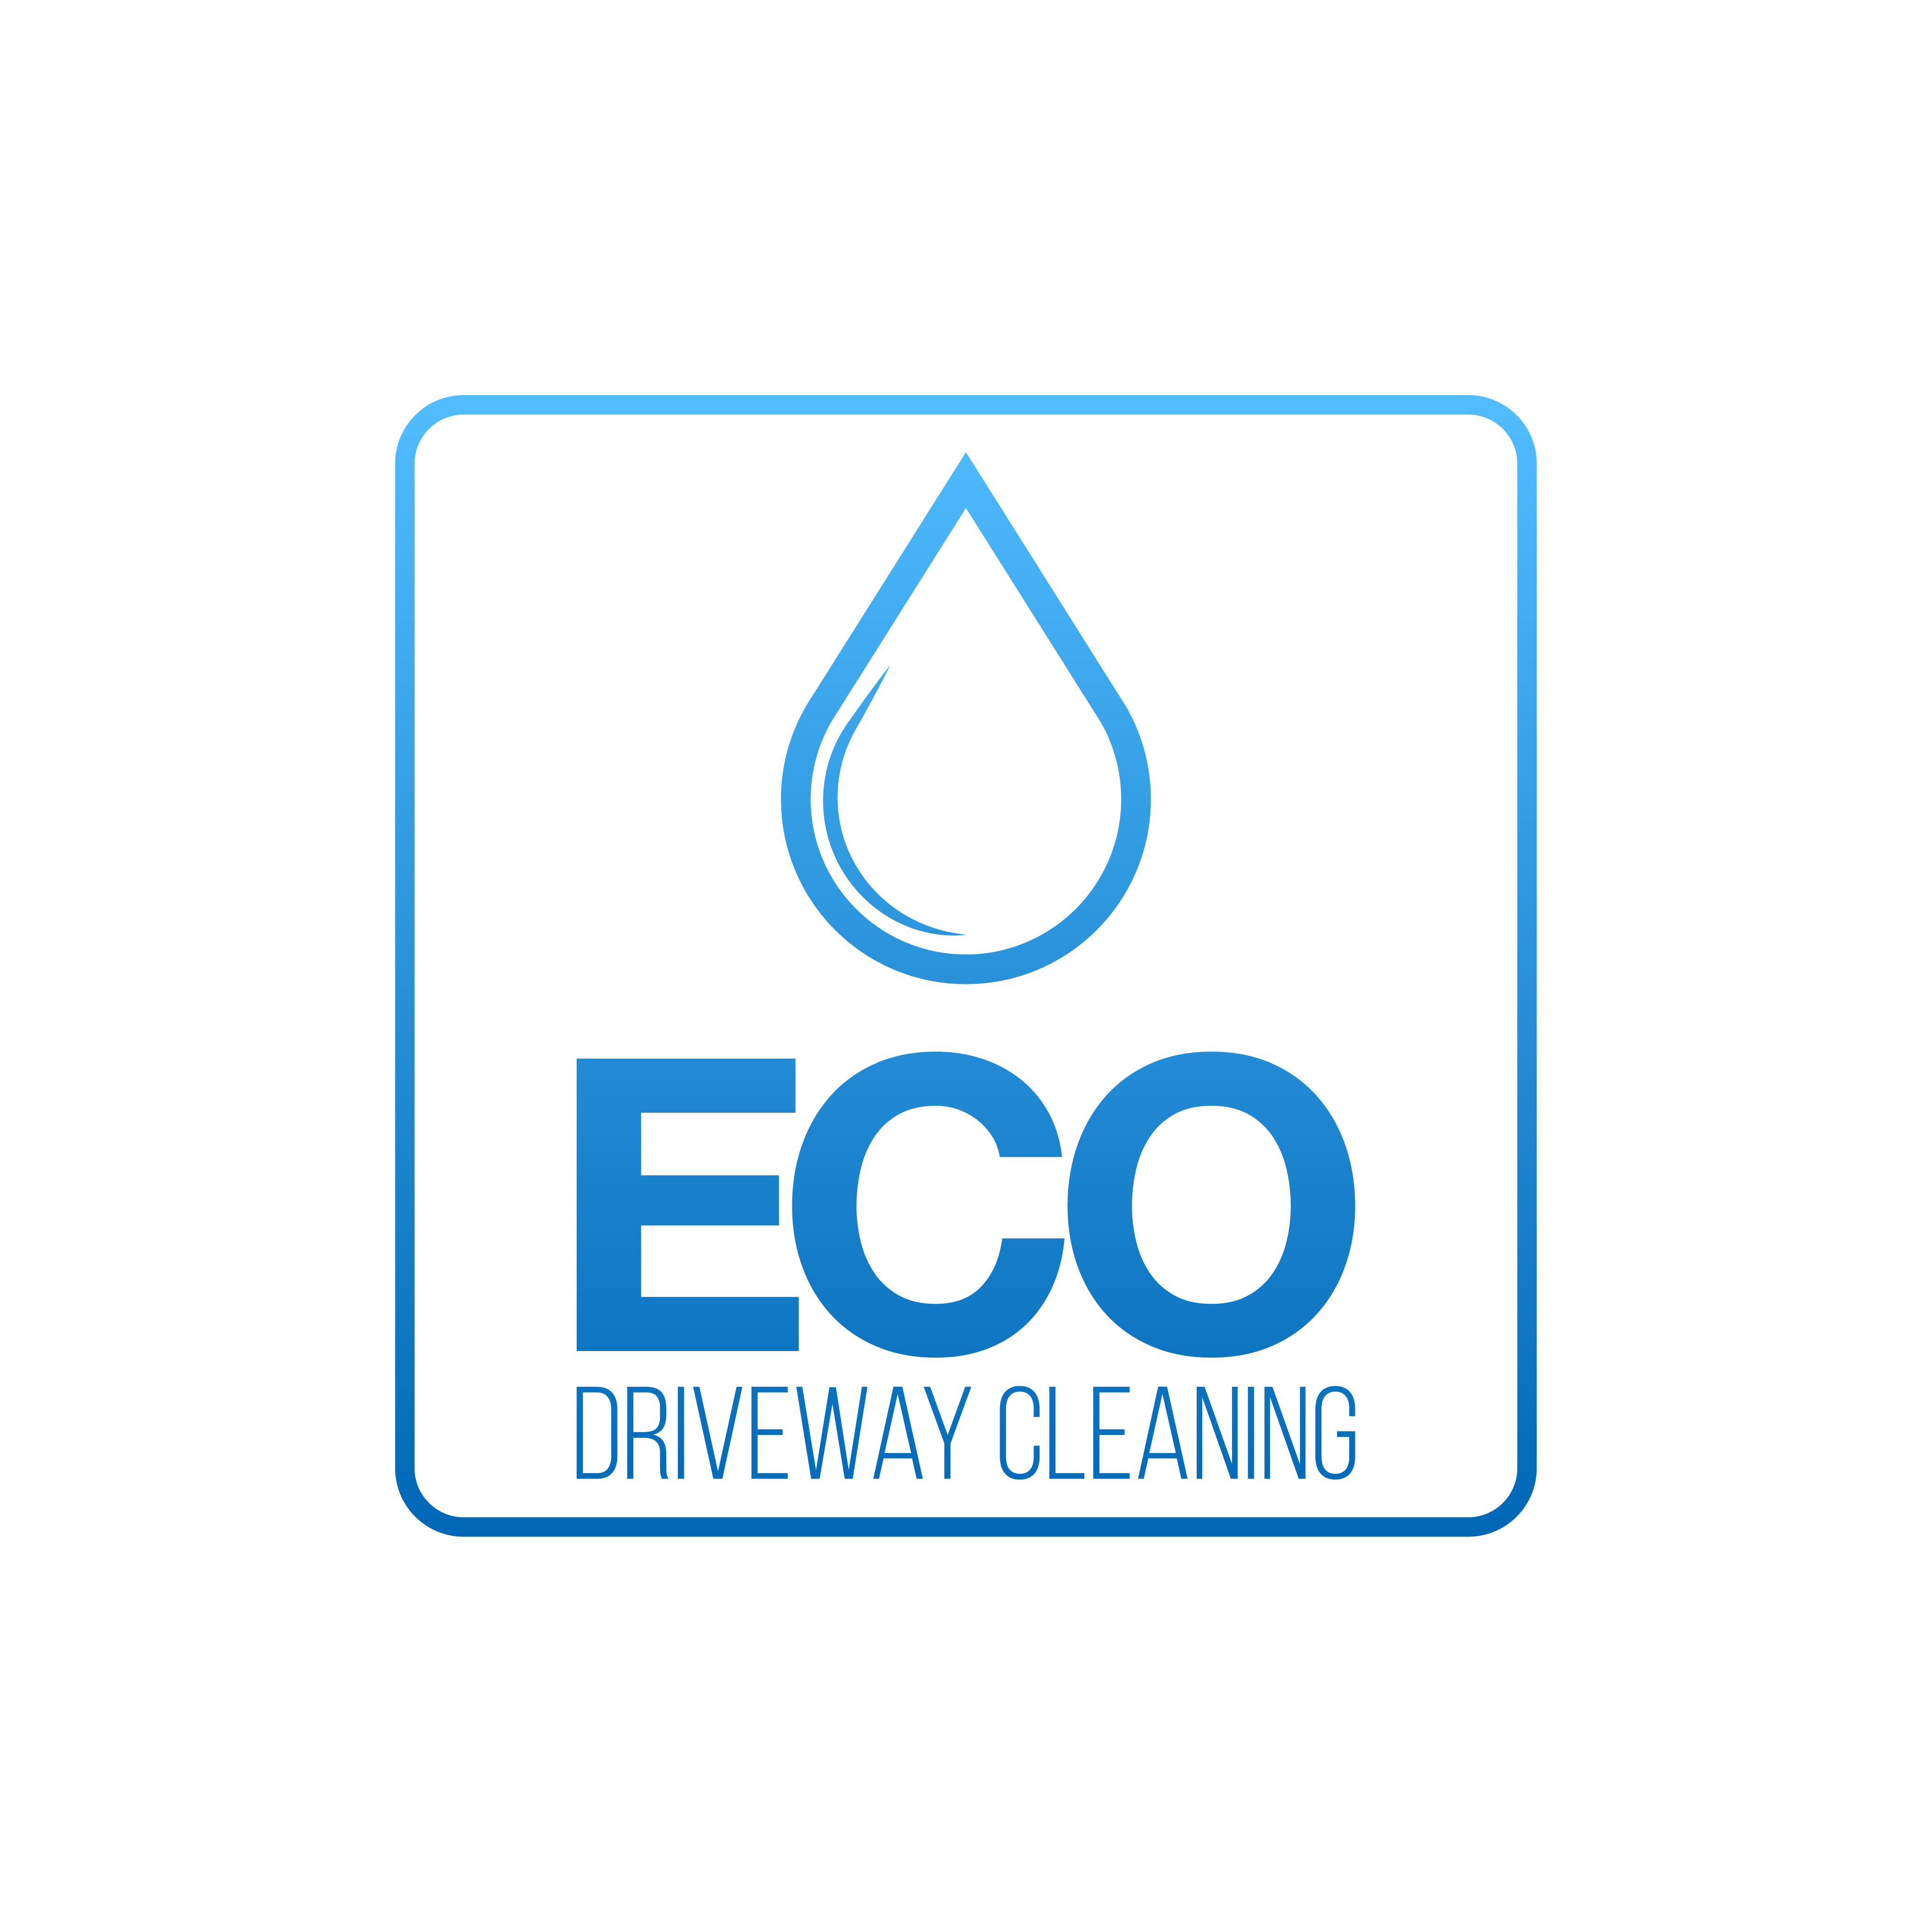 Logo of Eco Driveway Cleaning Pressure Washing Services In Glasgow, Lanarkshire